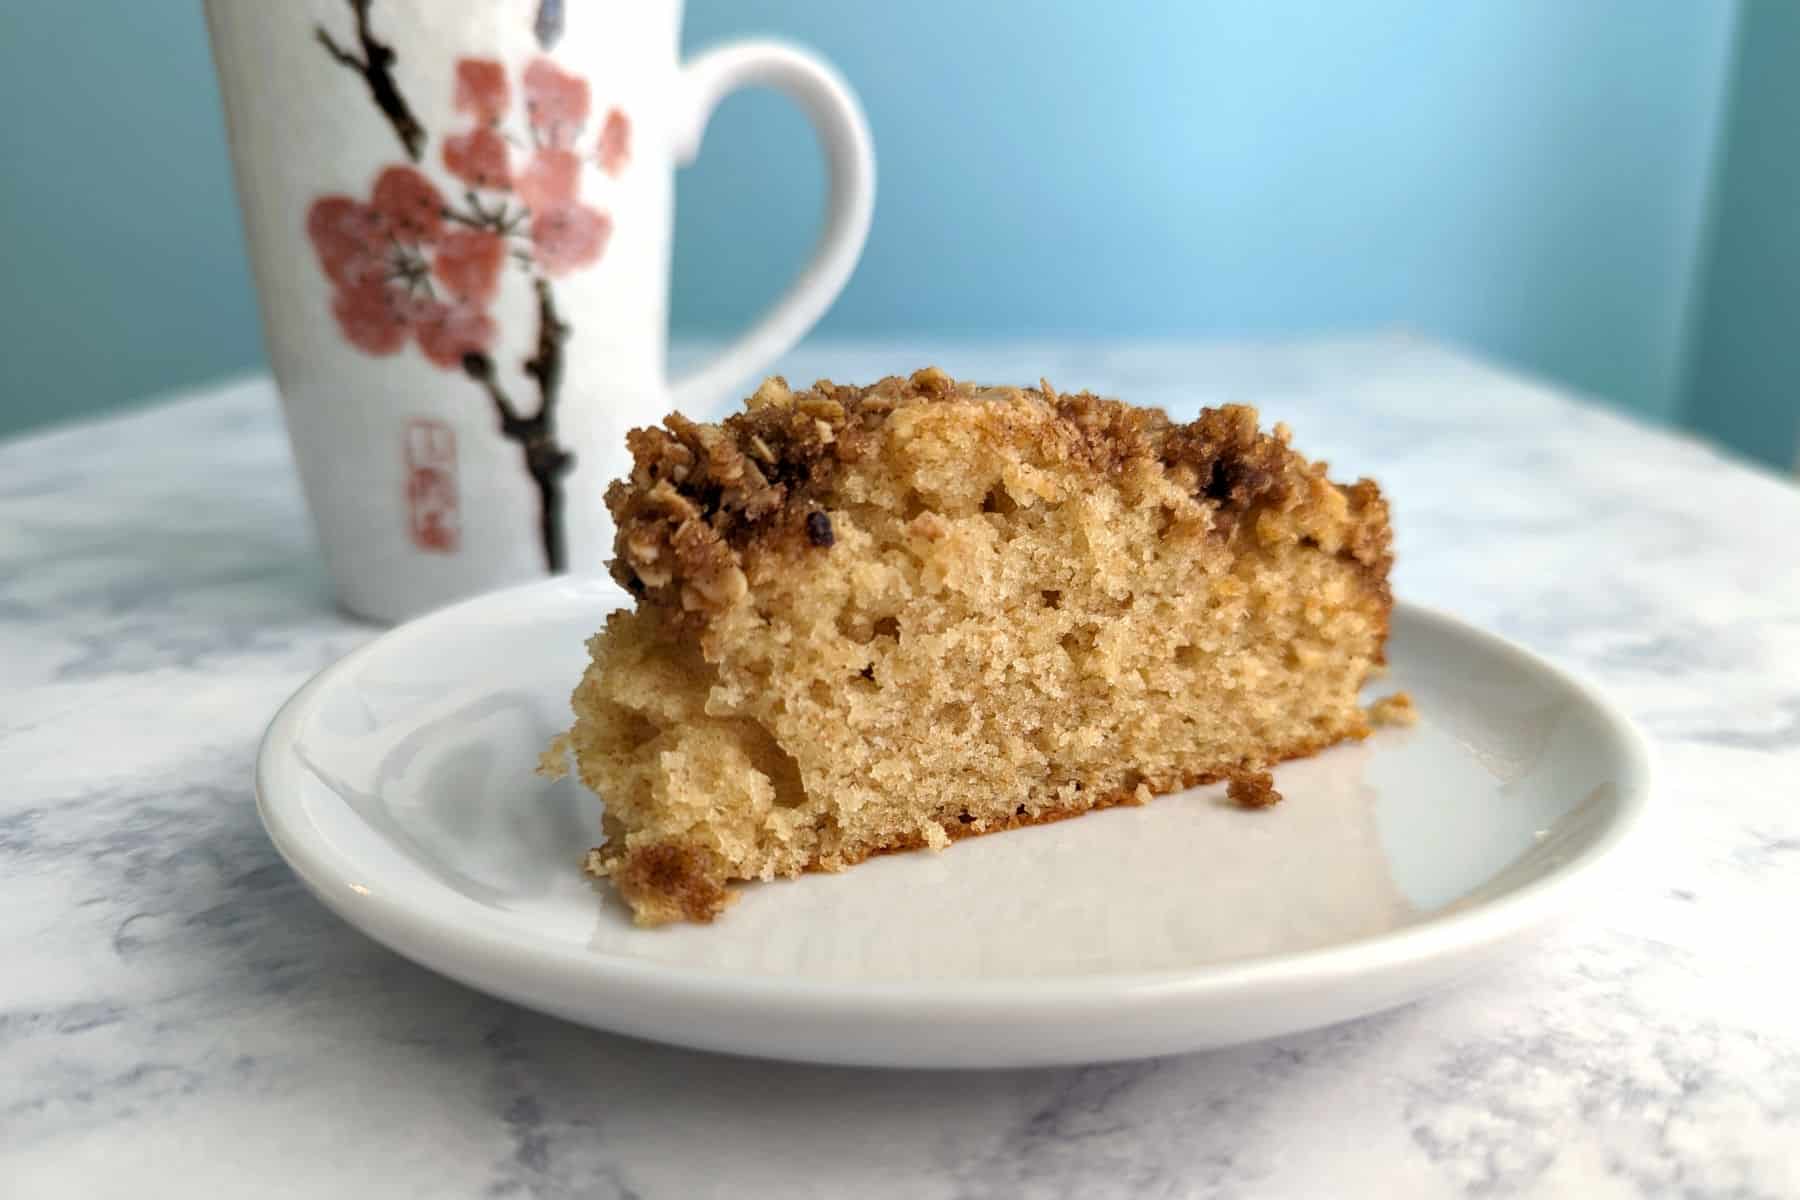 slice of sour cream coffee cake on a plate, with a flowered mug next to it